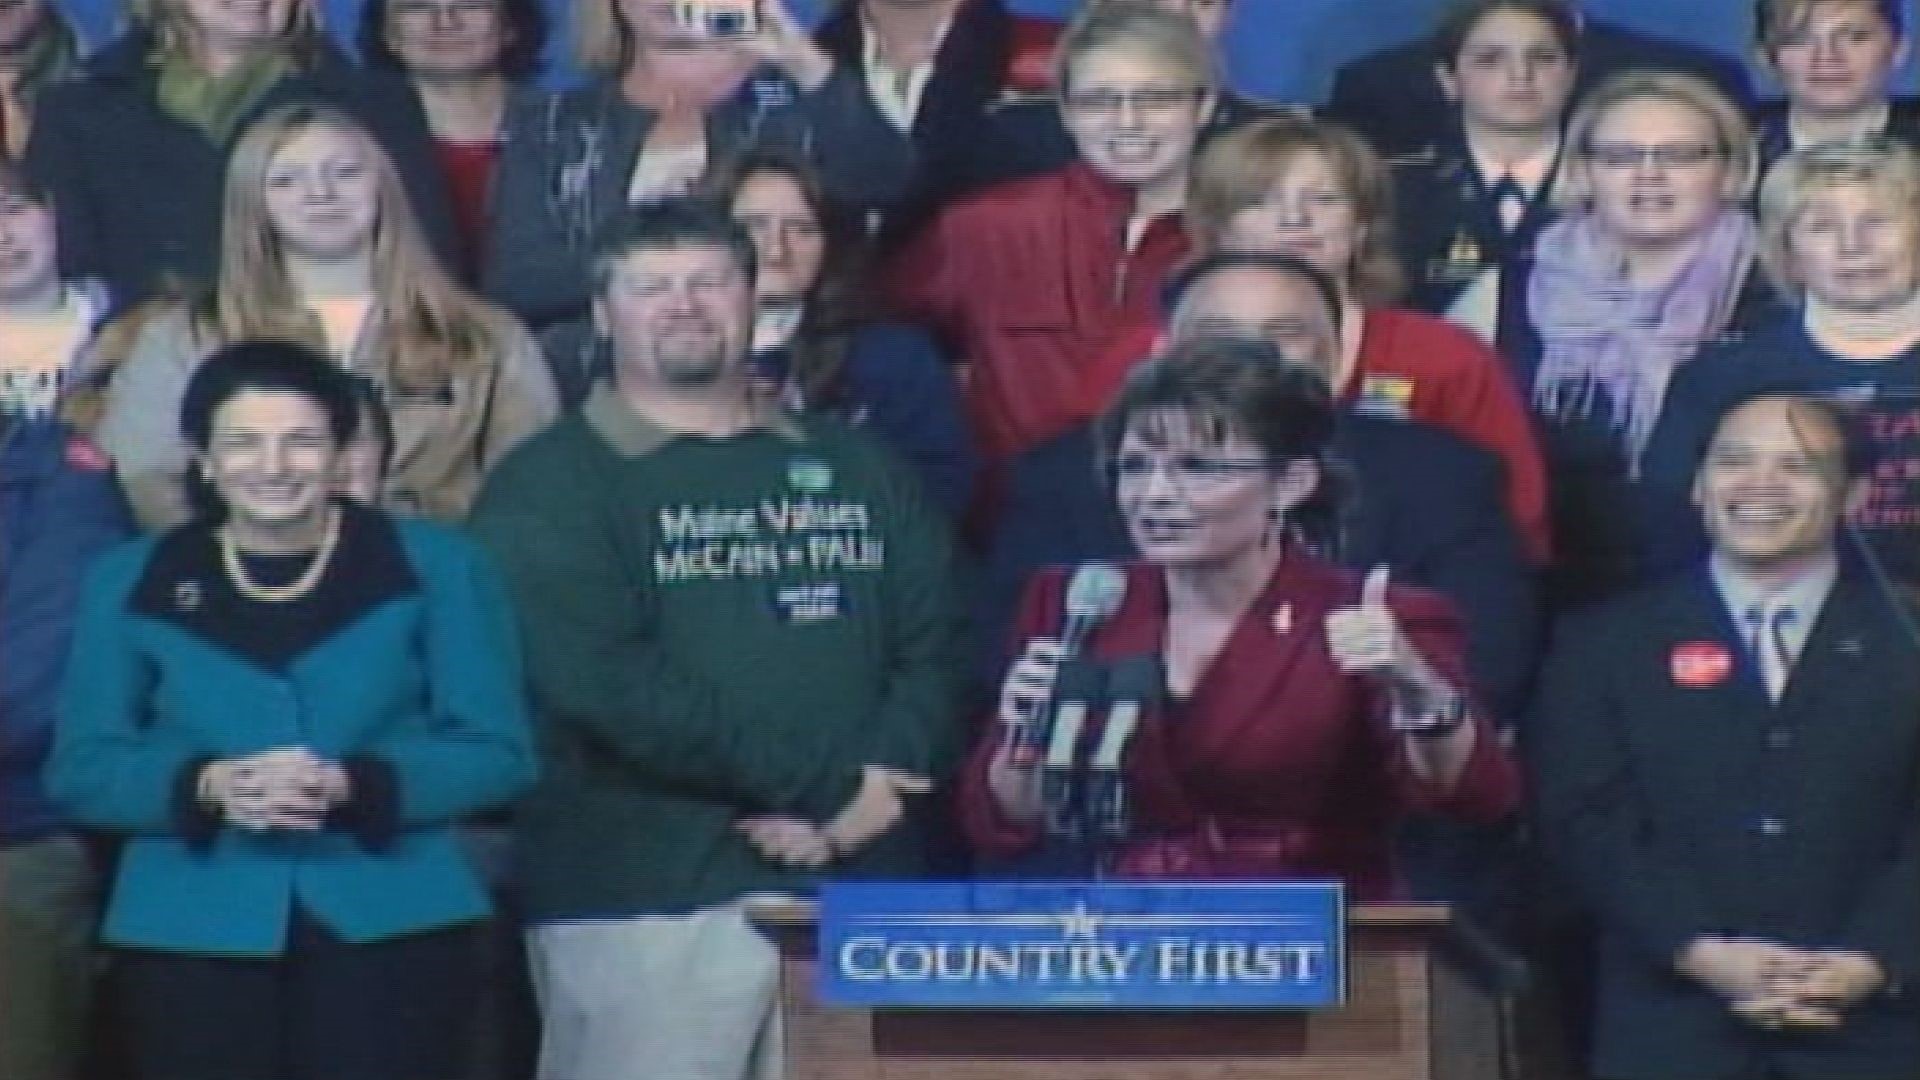 Cheers erupted as Vice Presidential candidate Sarah Palin launched into her famous catch phrase of "drill, baby, drill" on a campaign stop to Bangor in October 2008.